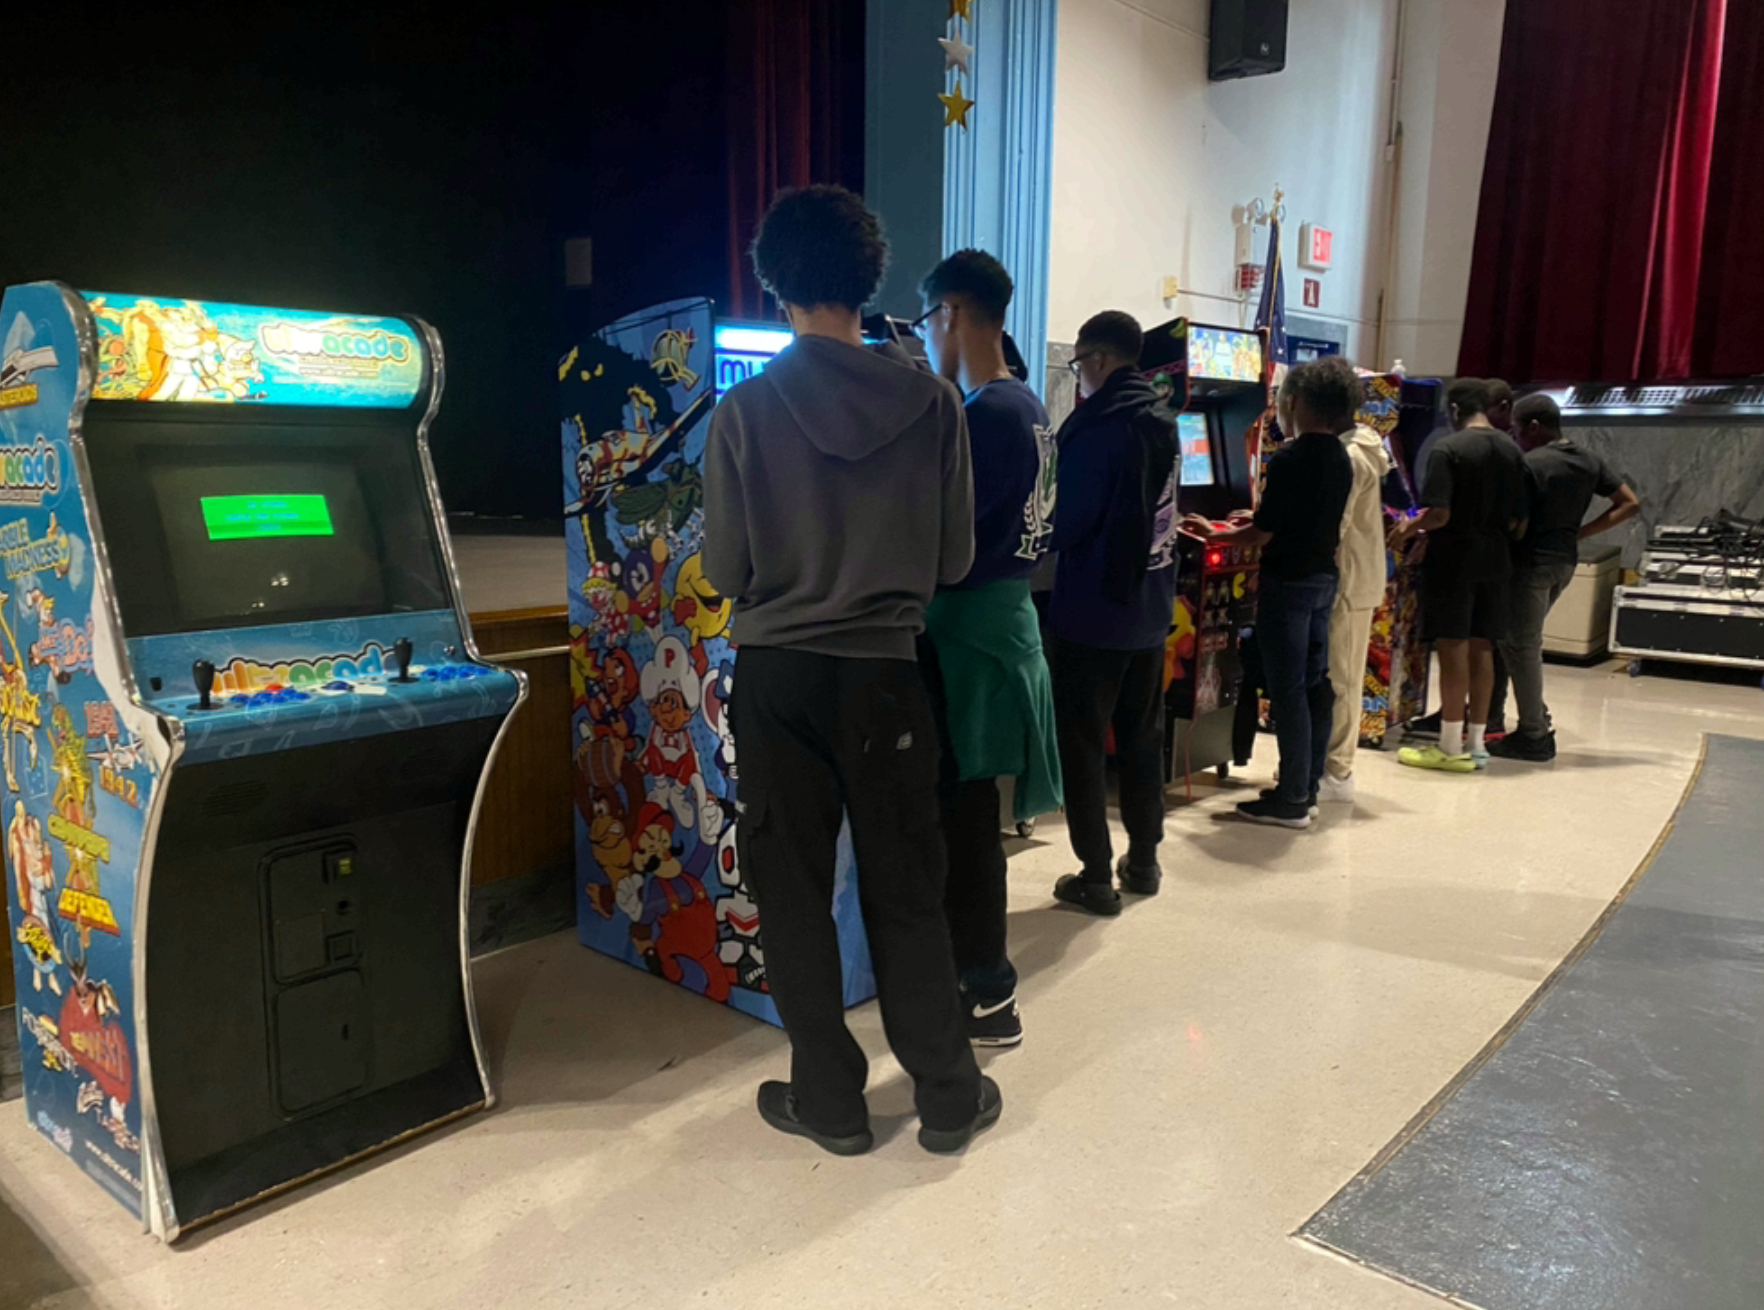 Arcade Games For Rent Long Island